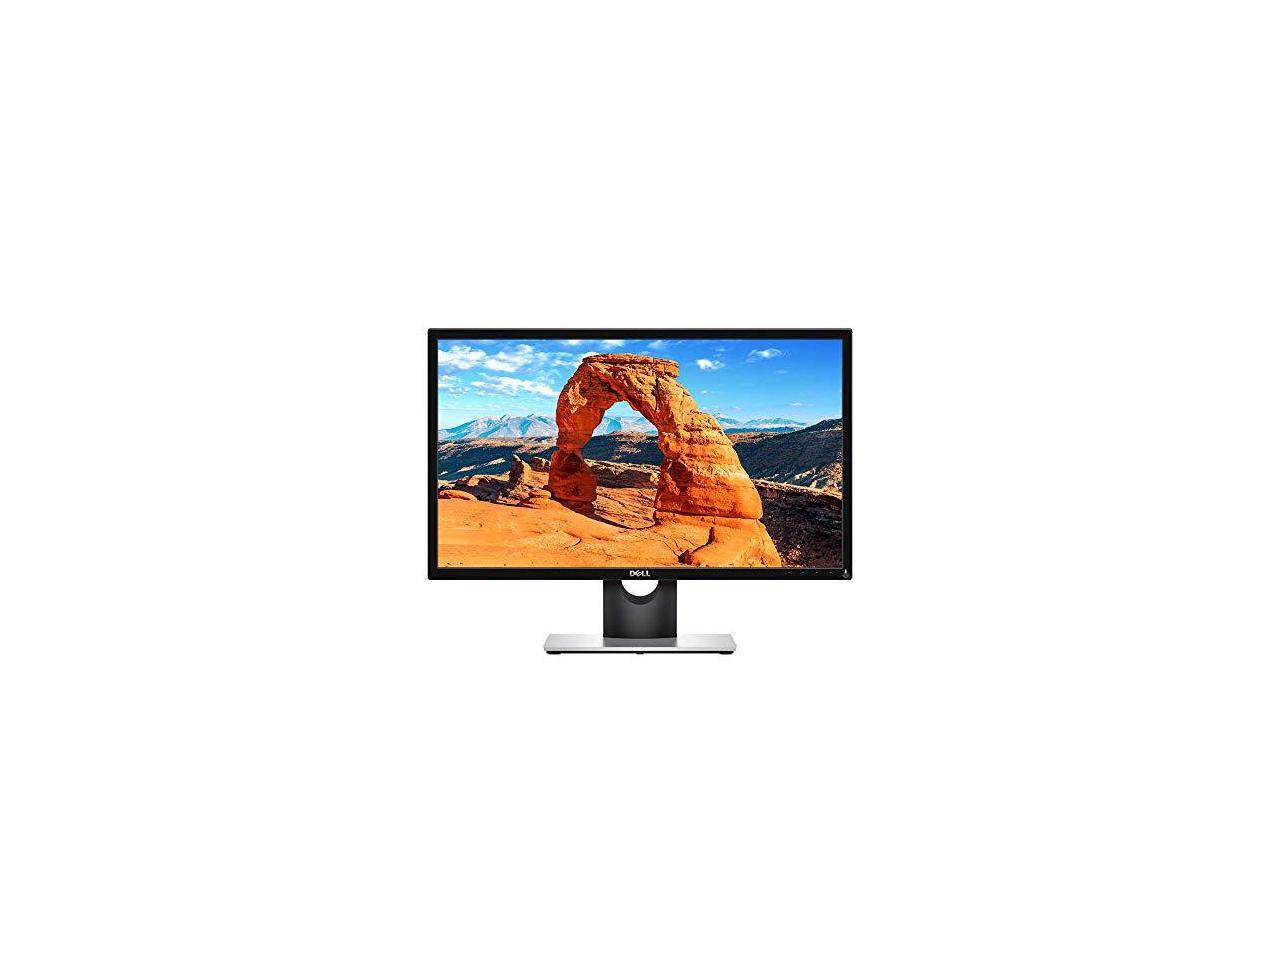 Dell DHSE2417HGX 24" (Actual size 23.6") Full HD 1920 x 1080 75Hz Up to 1ms 2 x HDMI, VGA HDCP Support AMD Radeon FreeSync Anti-Glare LED Backlit Gaming Monitor